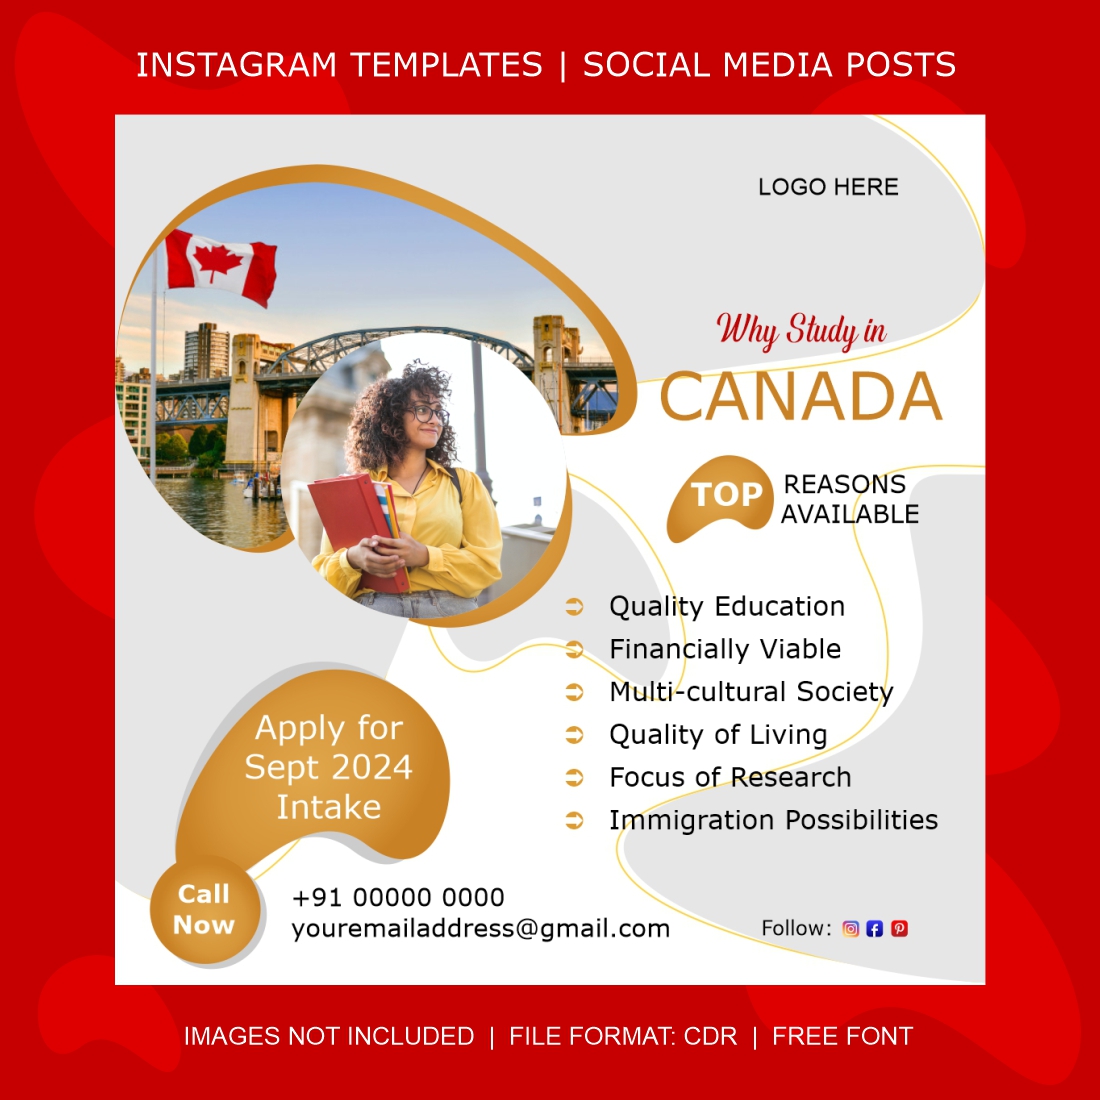 2 Attractive Instagram Templates | Social Media Posts cover image.